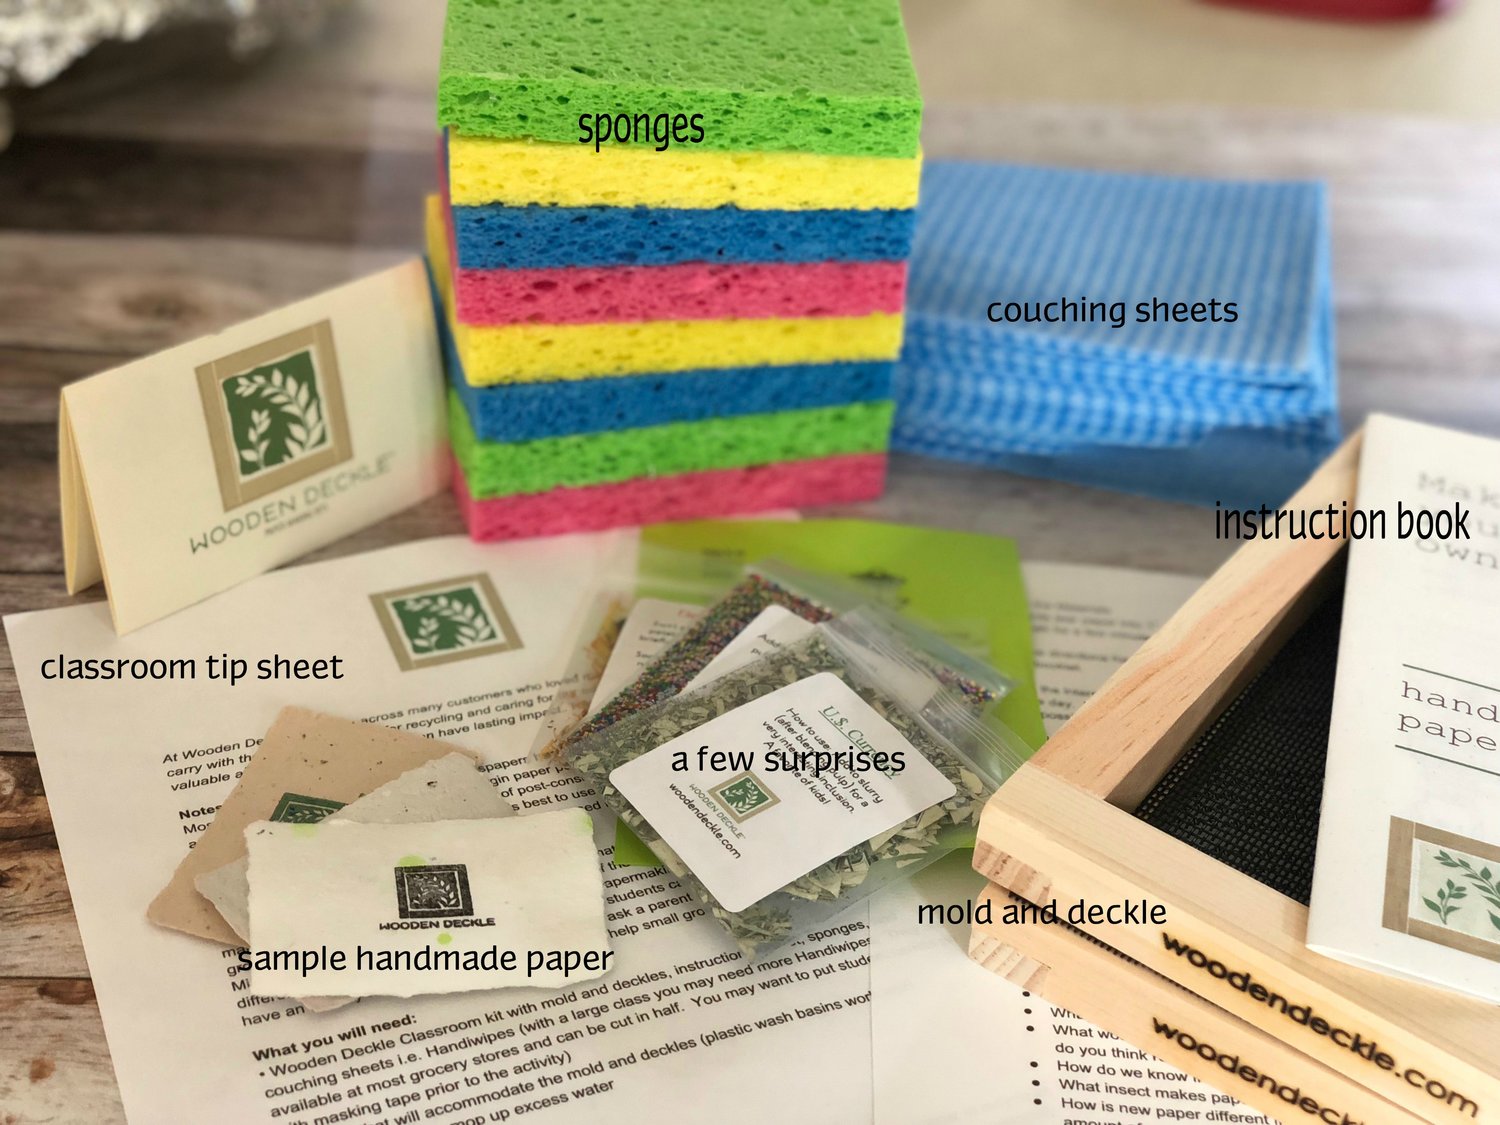 Square 5x5 Mold and Deckle — Wooden Deckle Papermaking Kits And Supplie